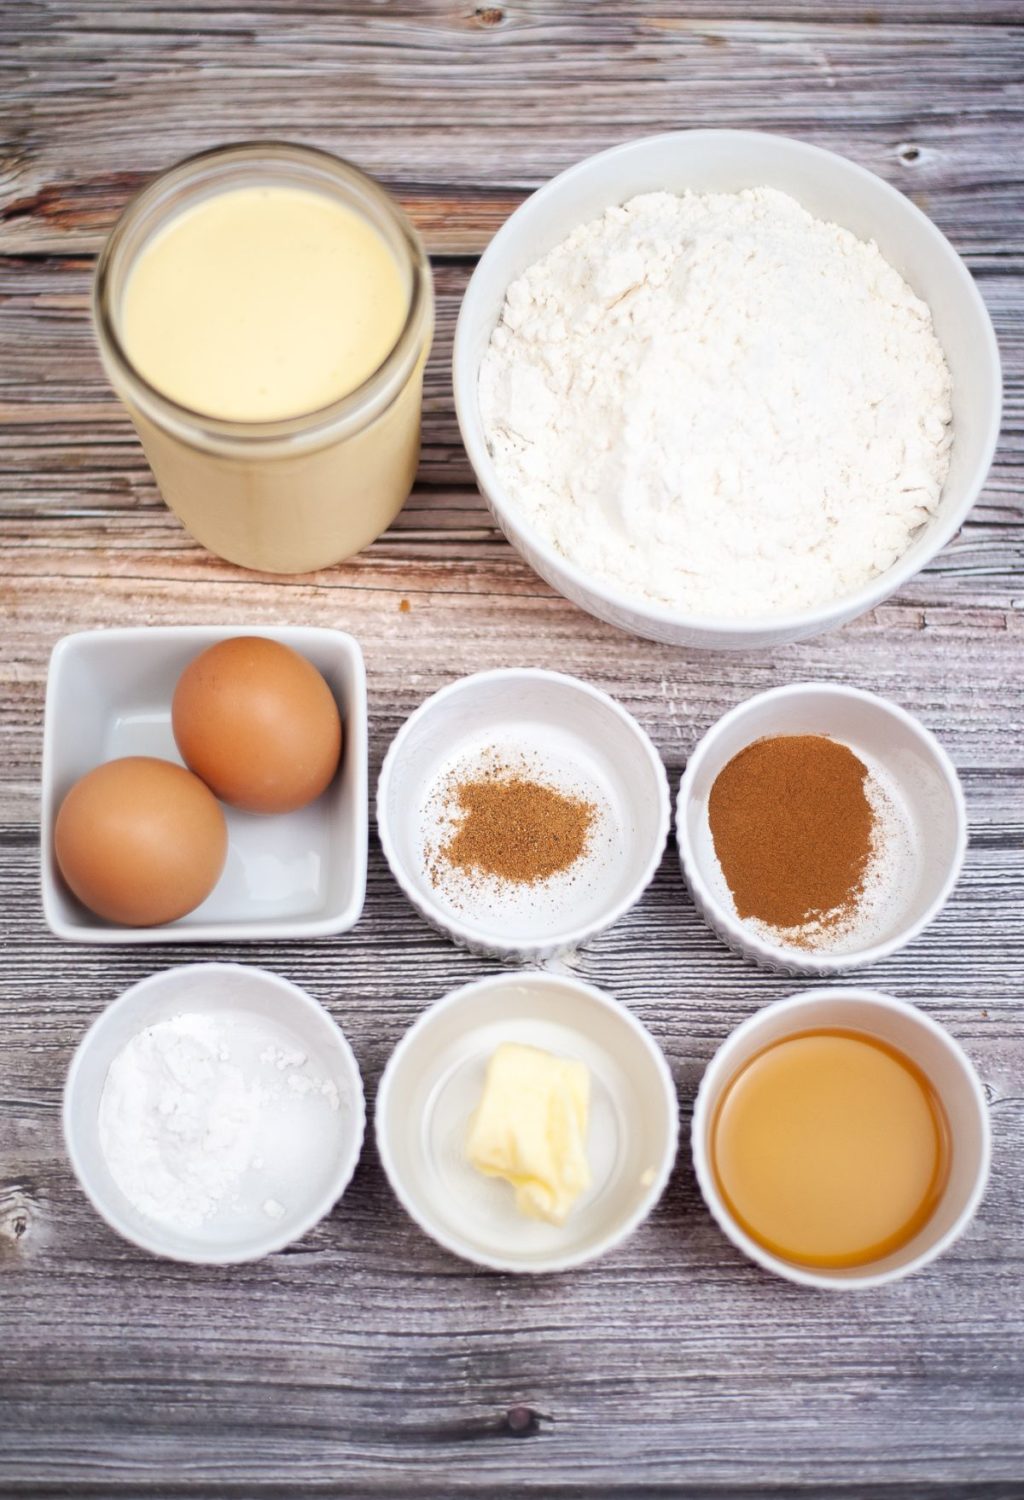 Ingredients for a cake including flour, eggs and butter on a wooden table.